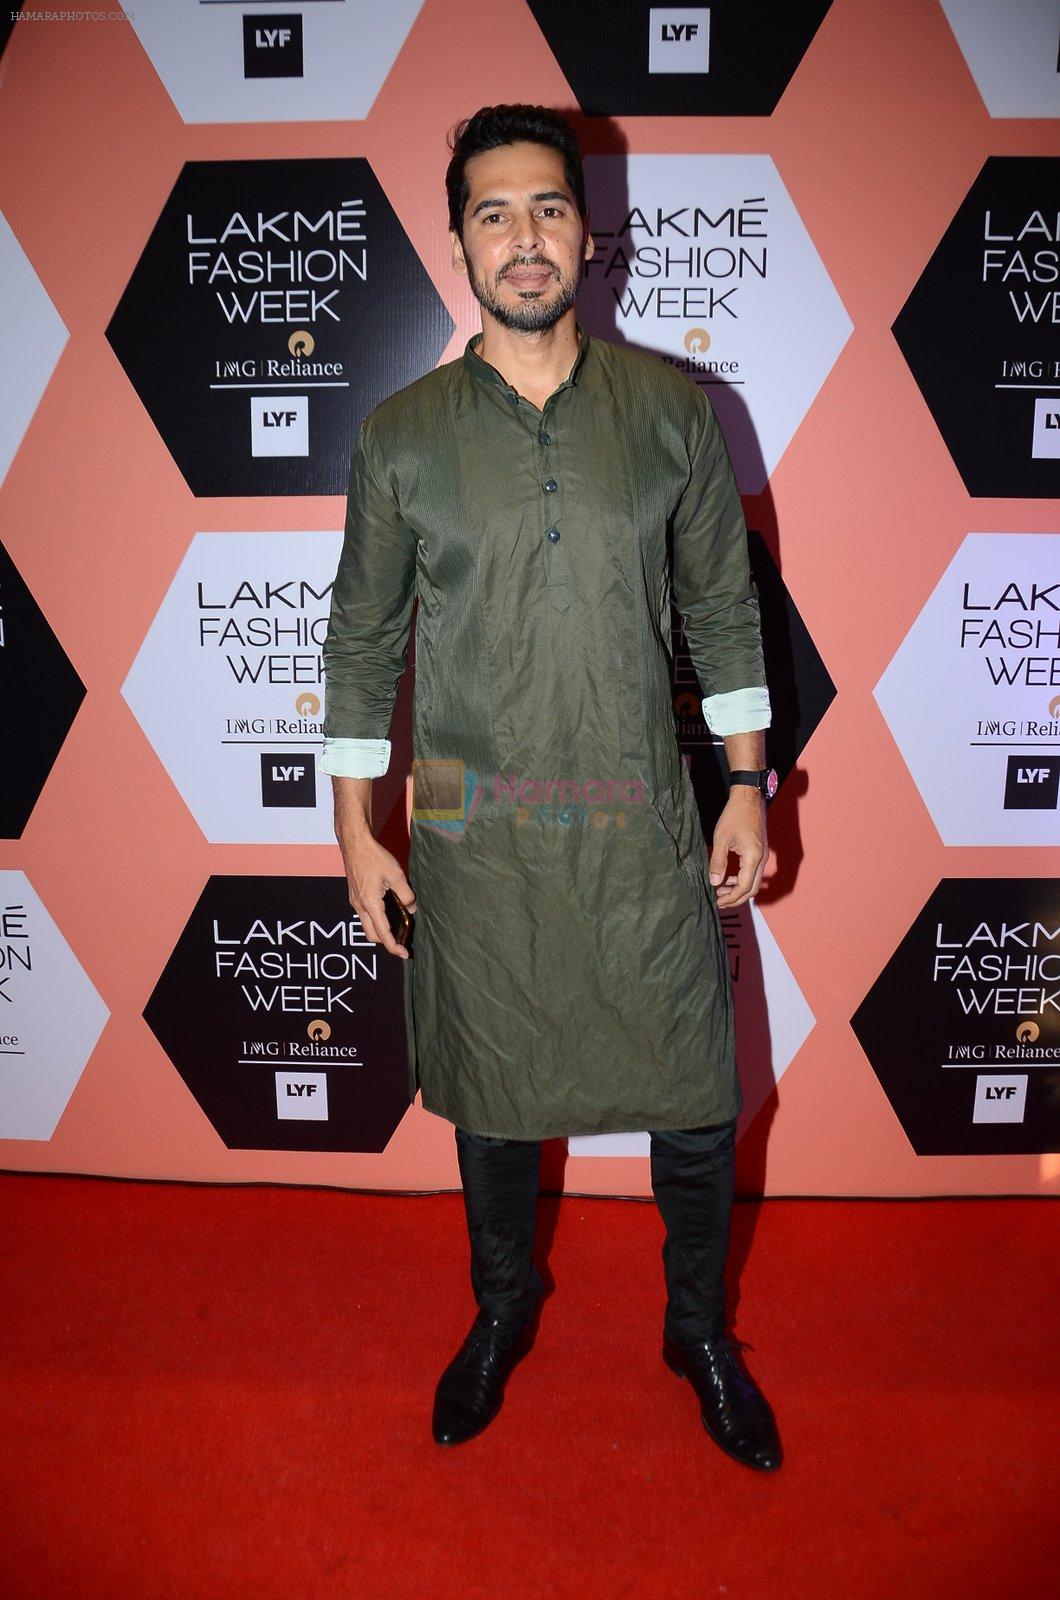 Dino Morea on Day 4 at Lakme Fashion Week 2016 on 2nd April 2016